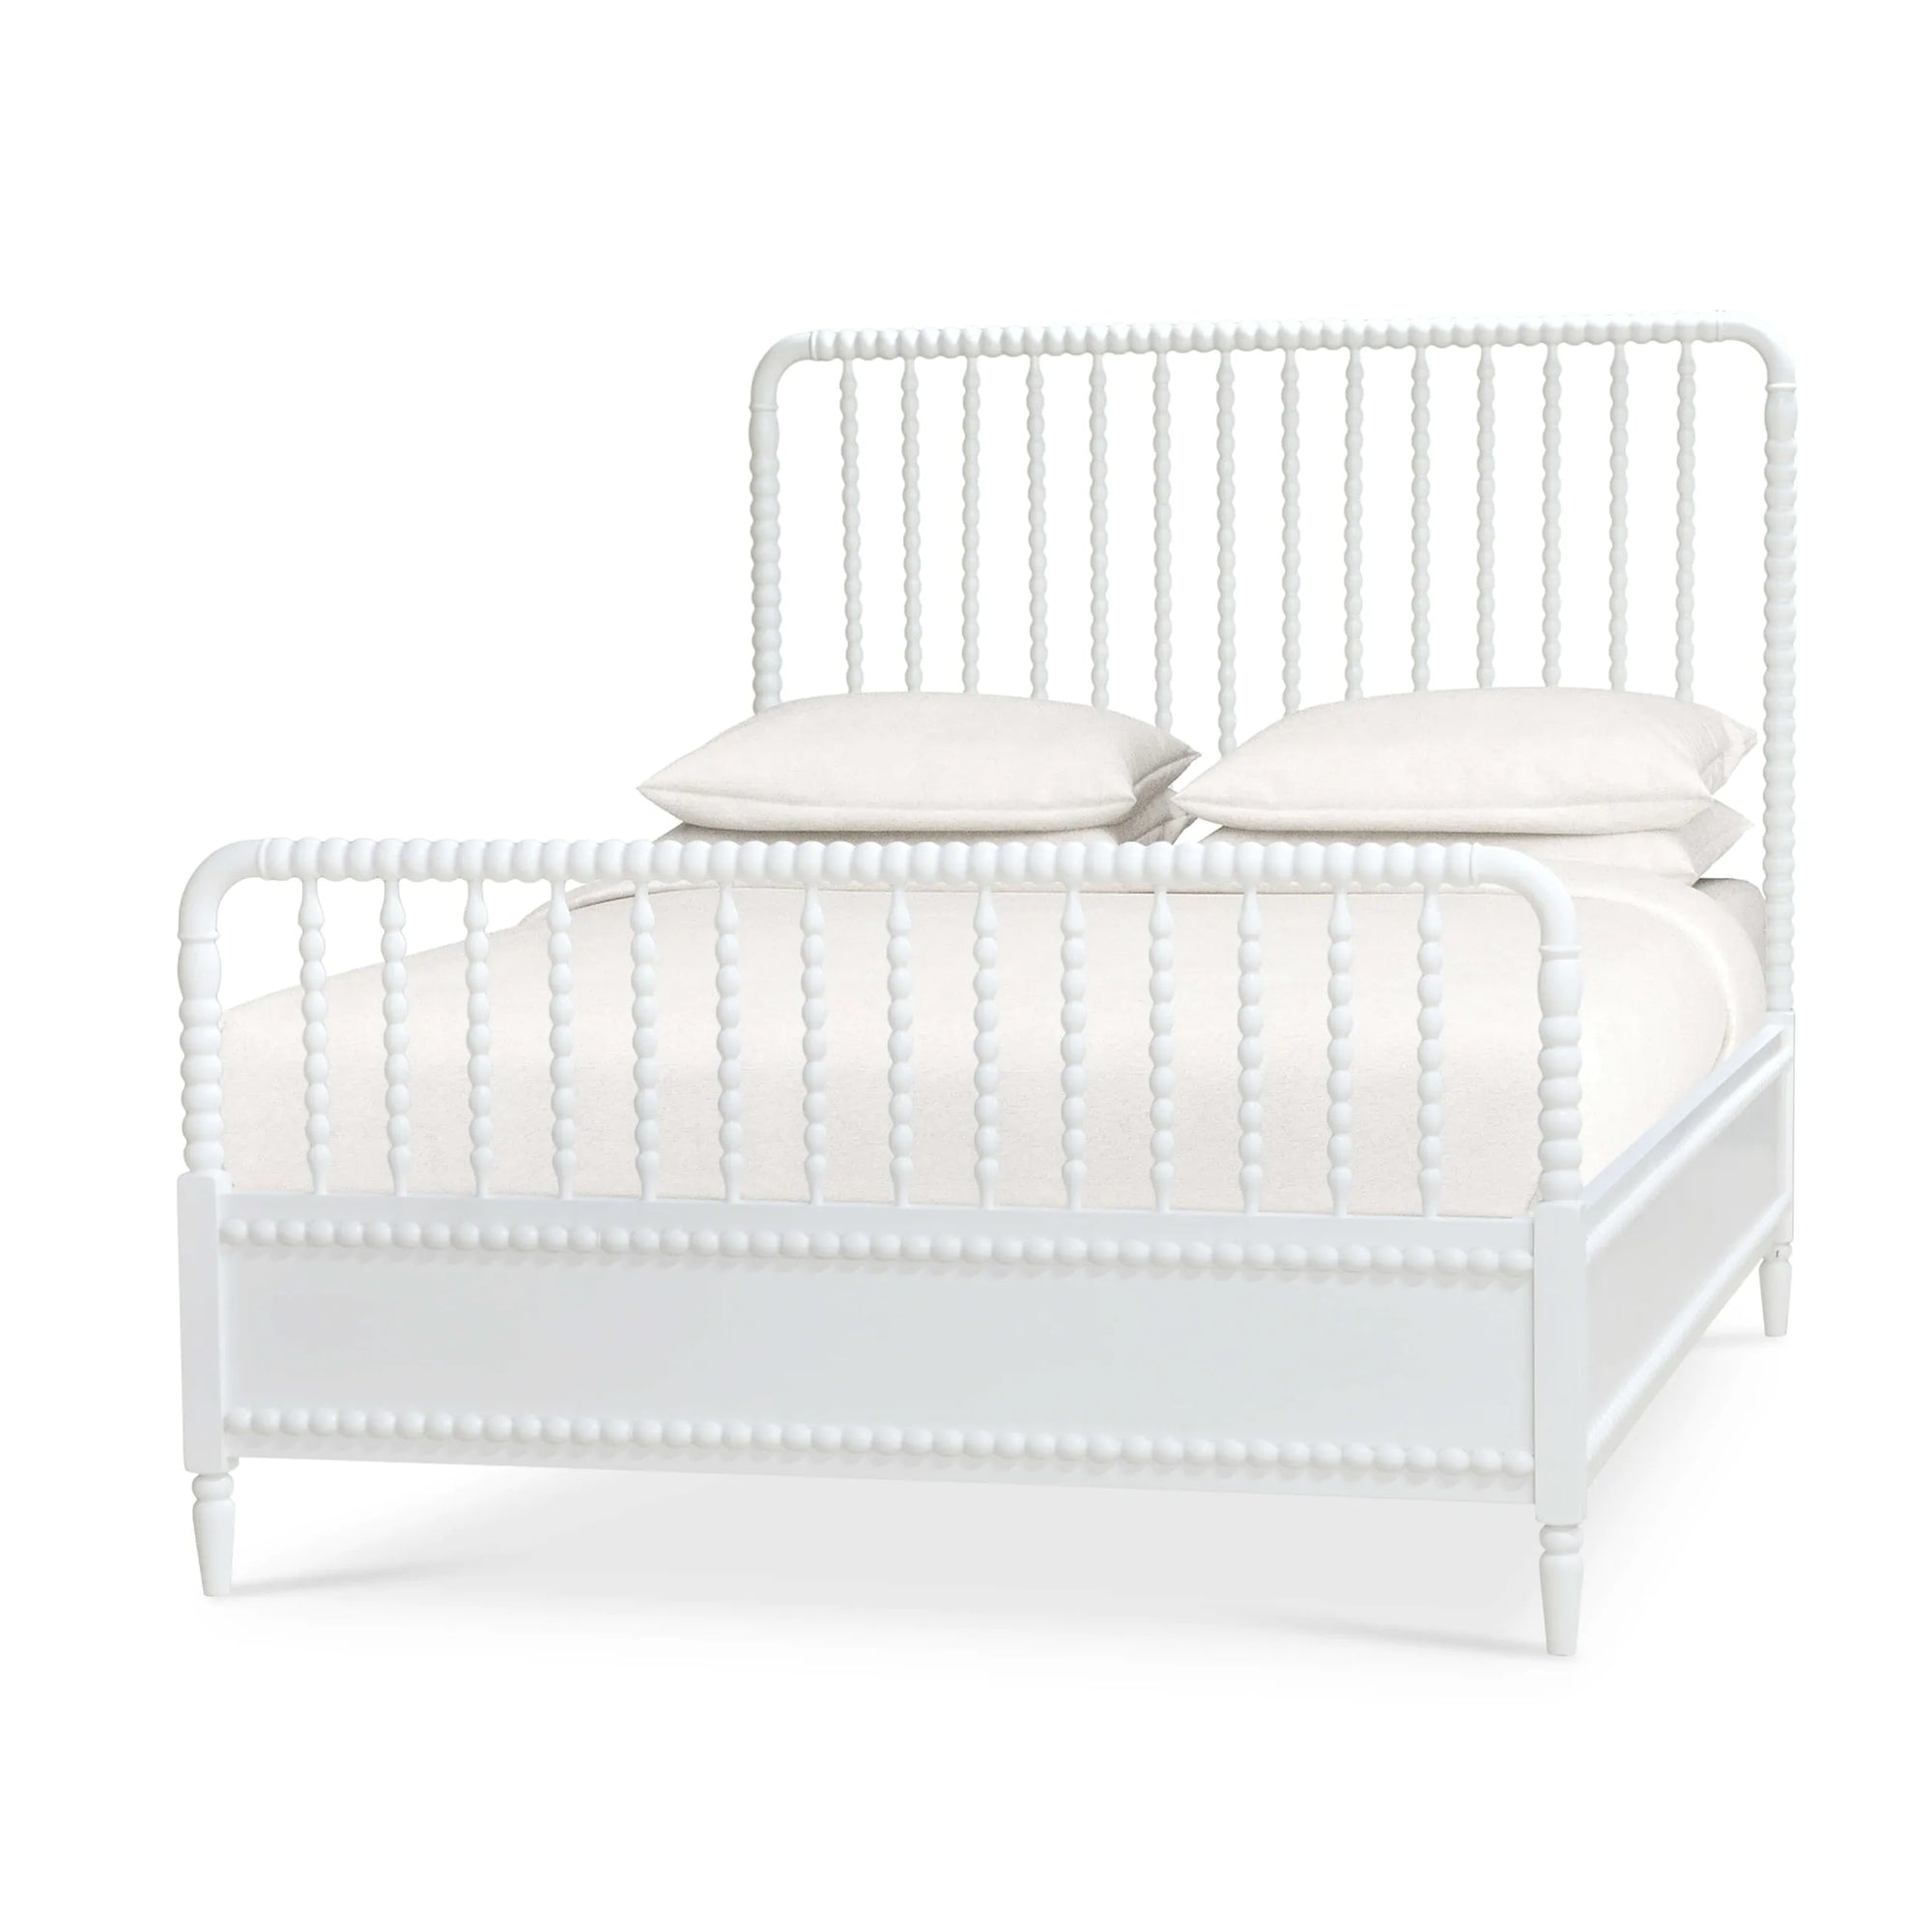 Cholet Bed Queen Architectural White, Light Distressed